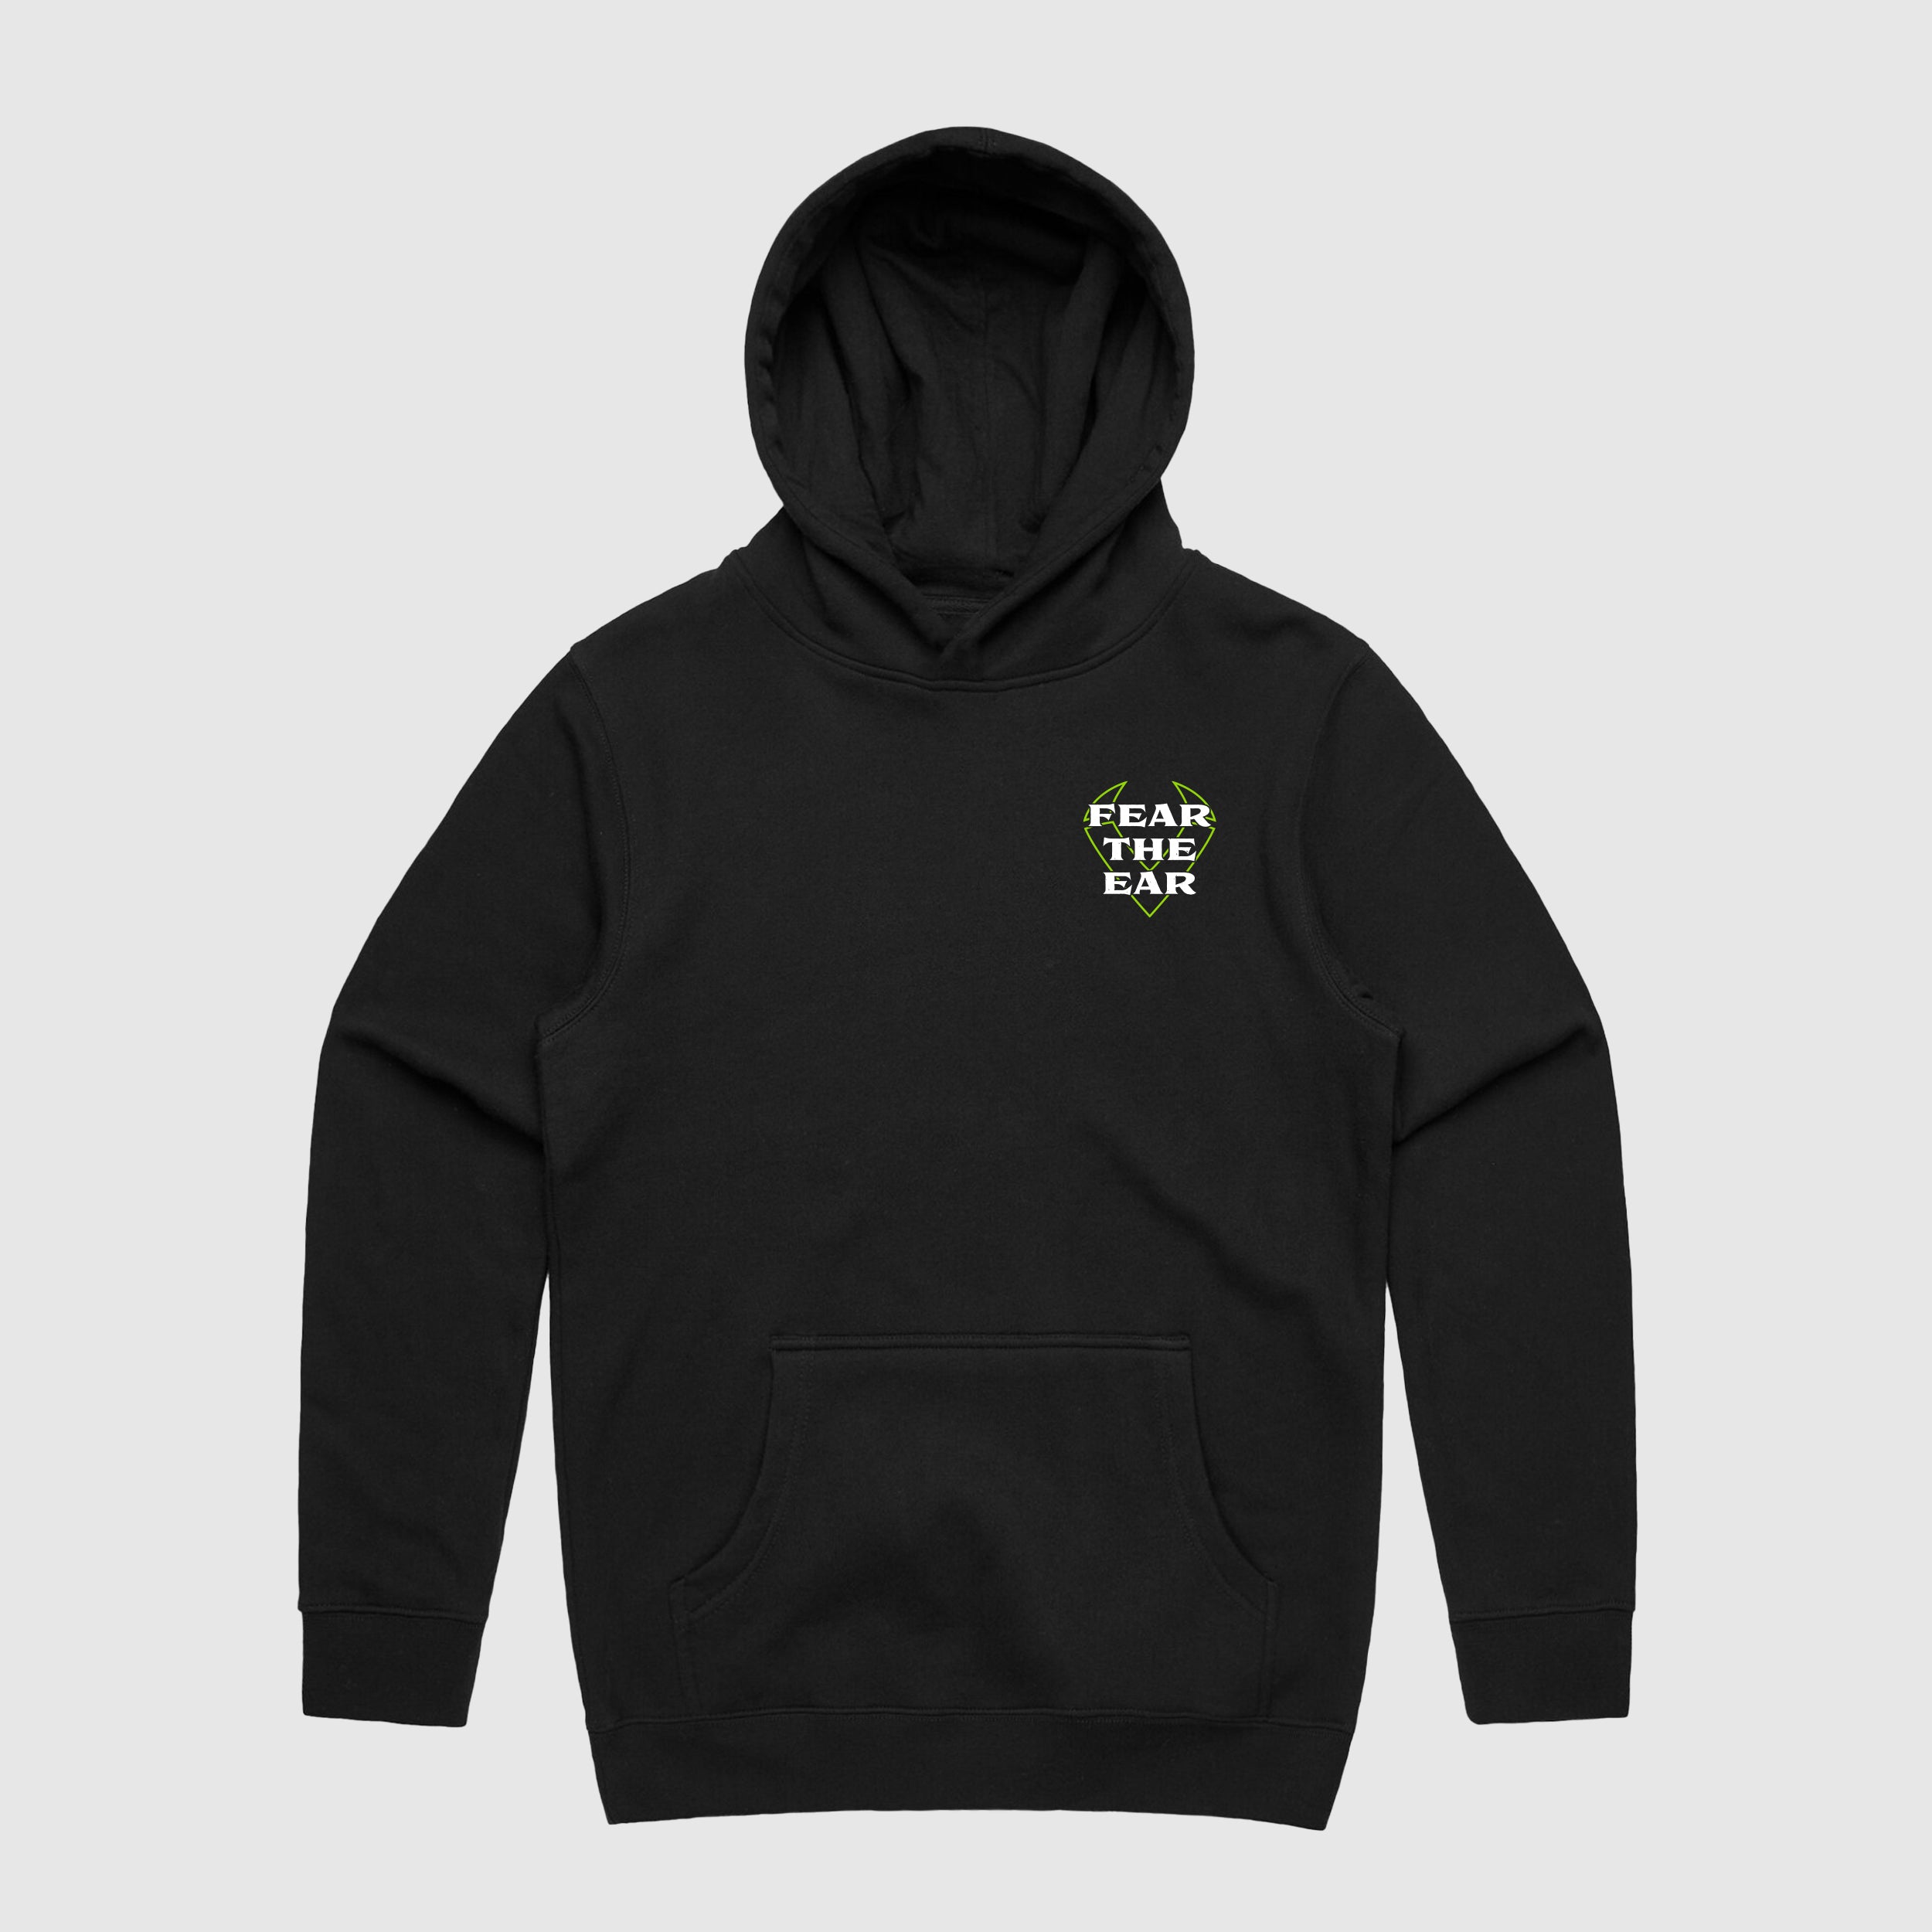 Youth "Fear the Ear" Hoodie